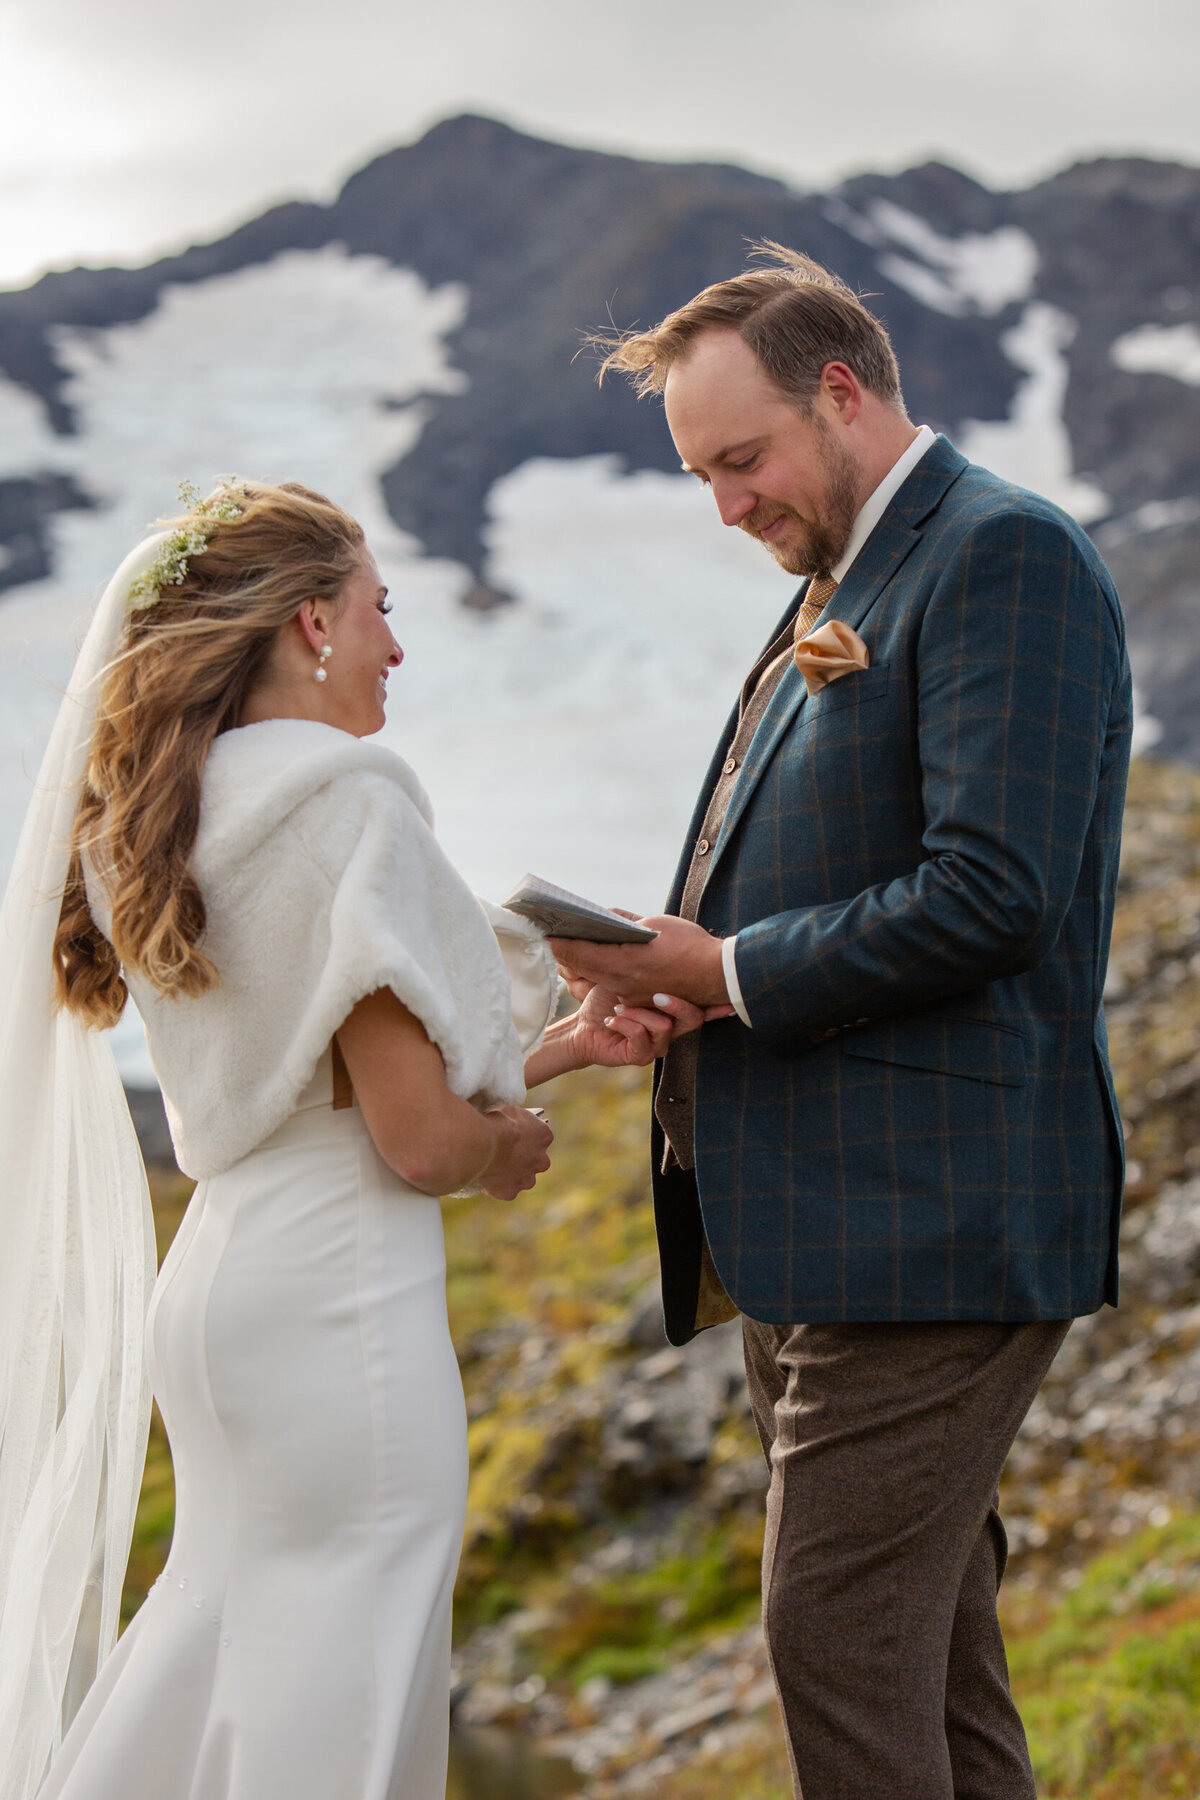 A groom reads his vows to his wife during their Elopement ceremony in Alaska.